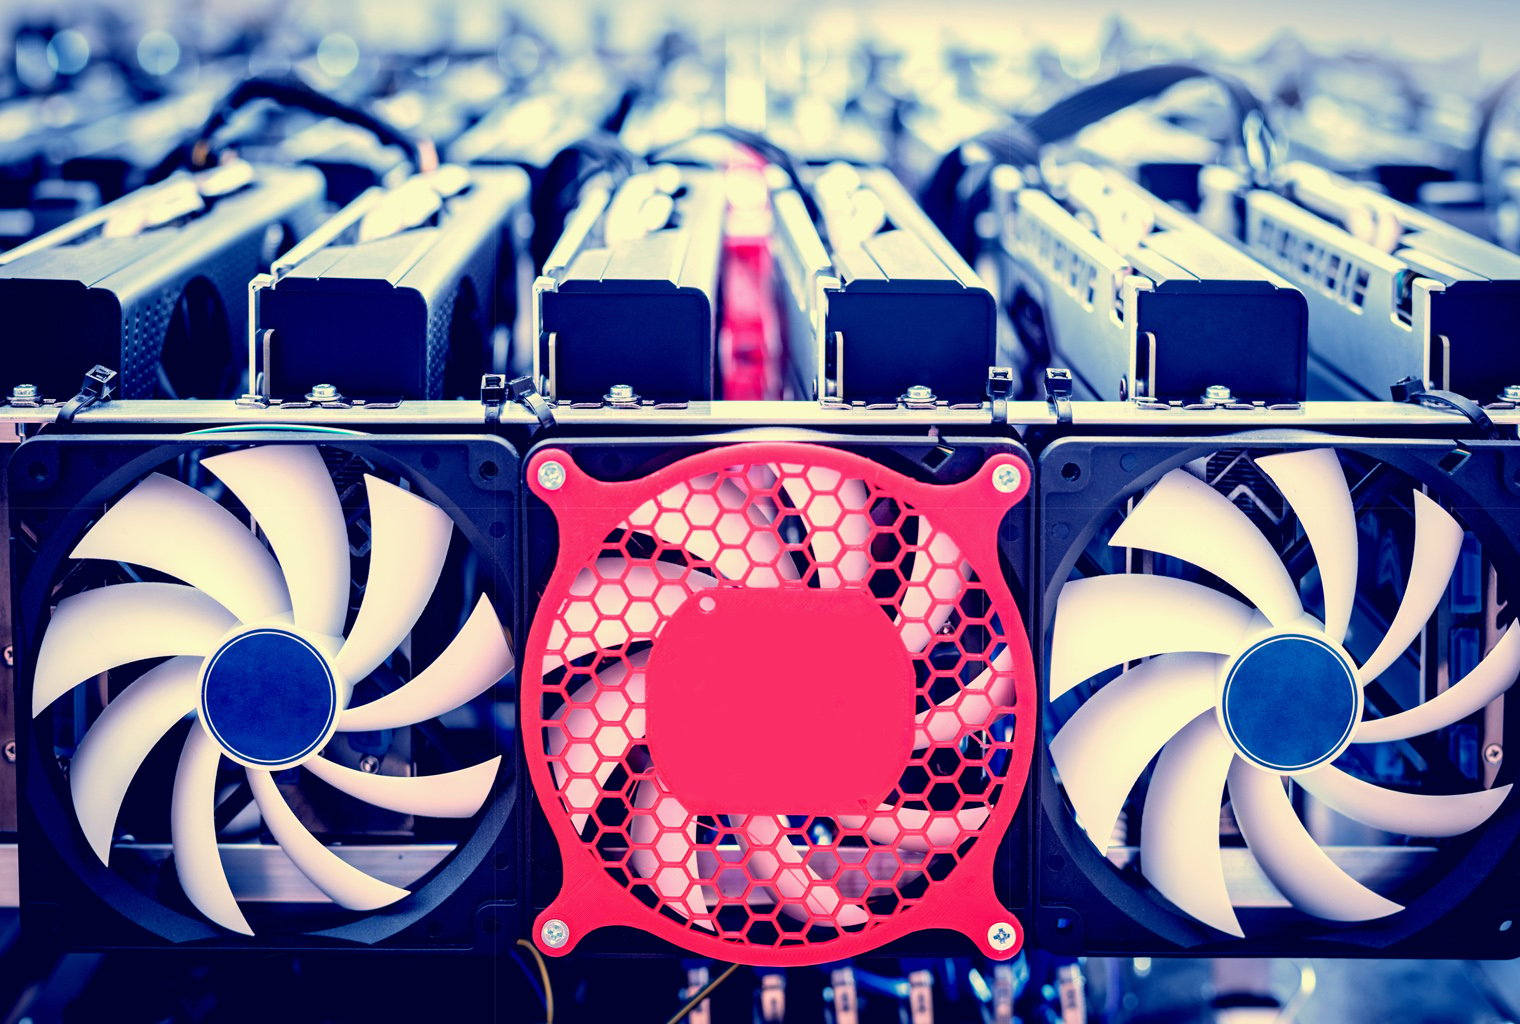 Report Claims 85% of the Monero Network Overshadowed by ASIC Miners